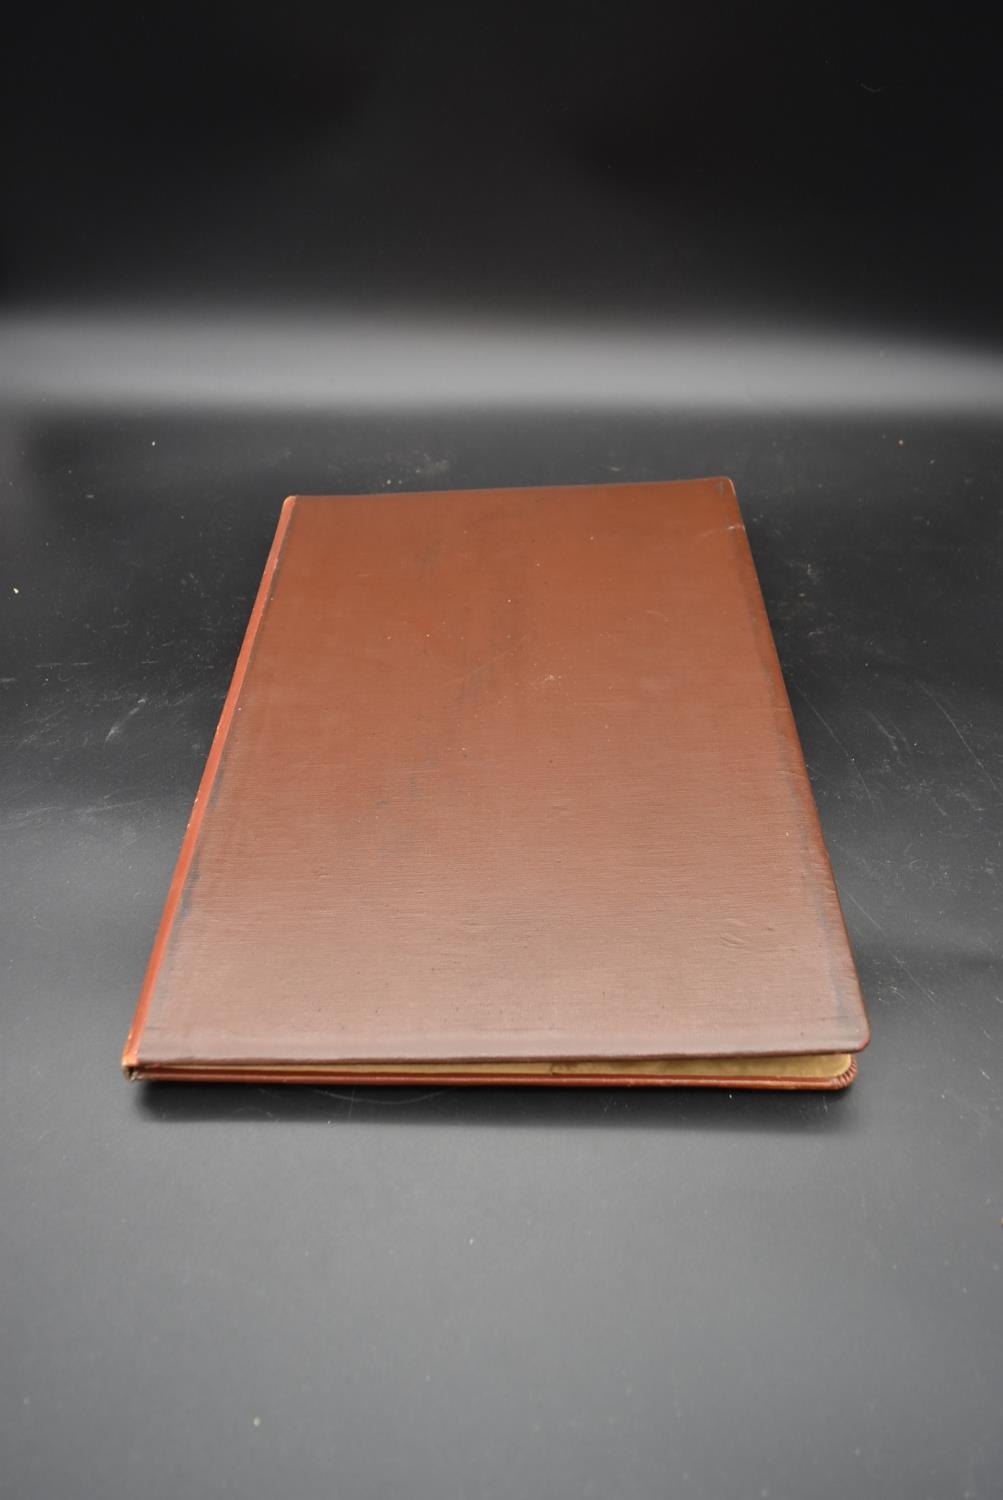 A vintage leather fronted stationary blotting pad along with a tan leather stationary folder with - Image 2 of 25